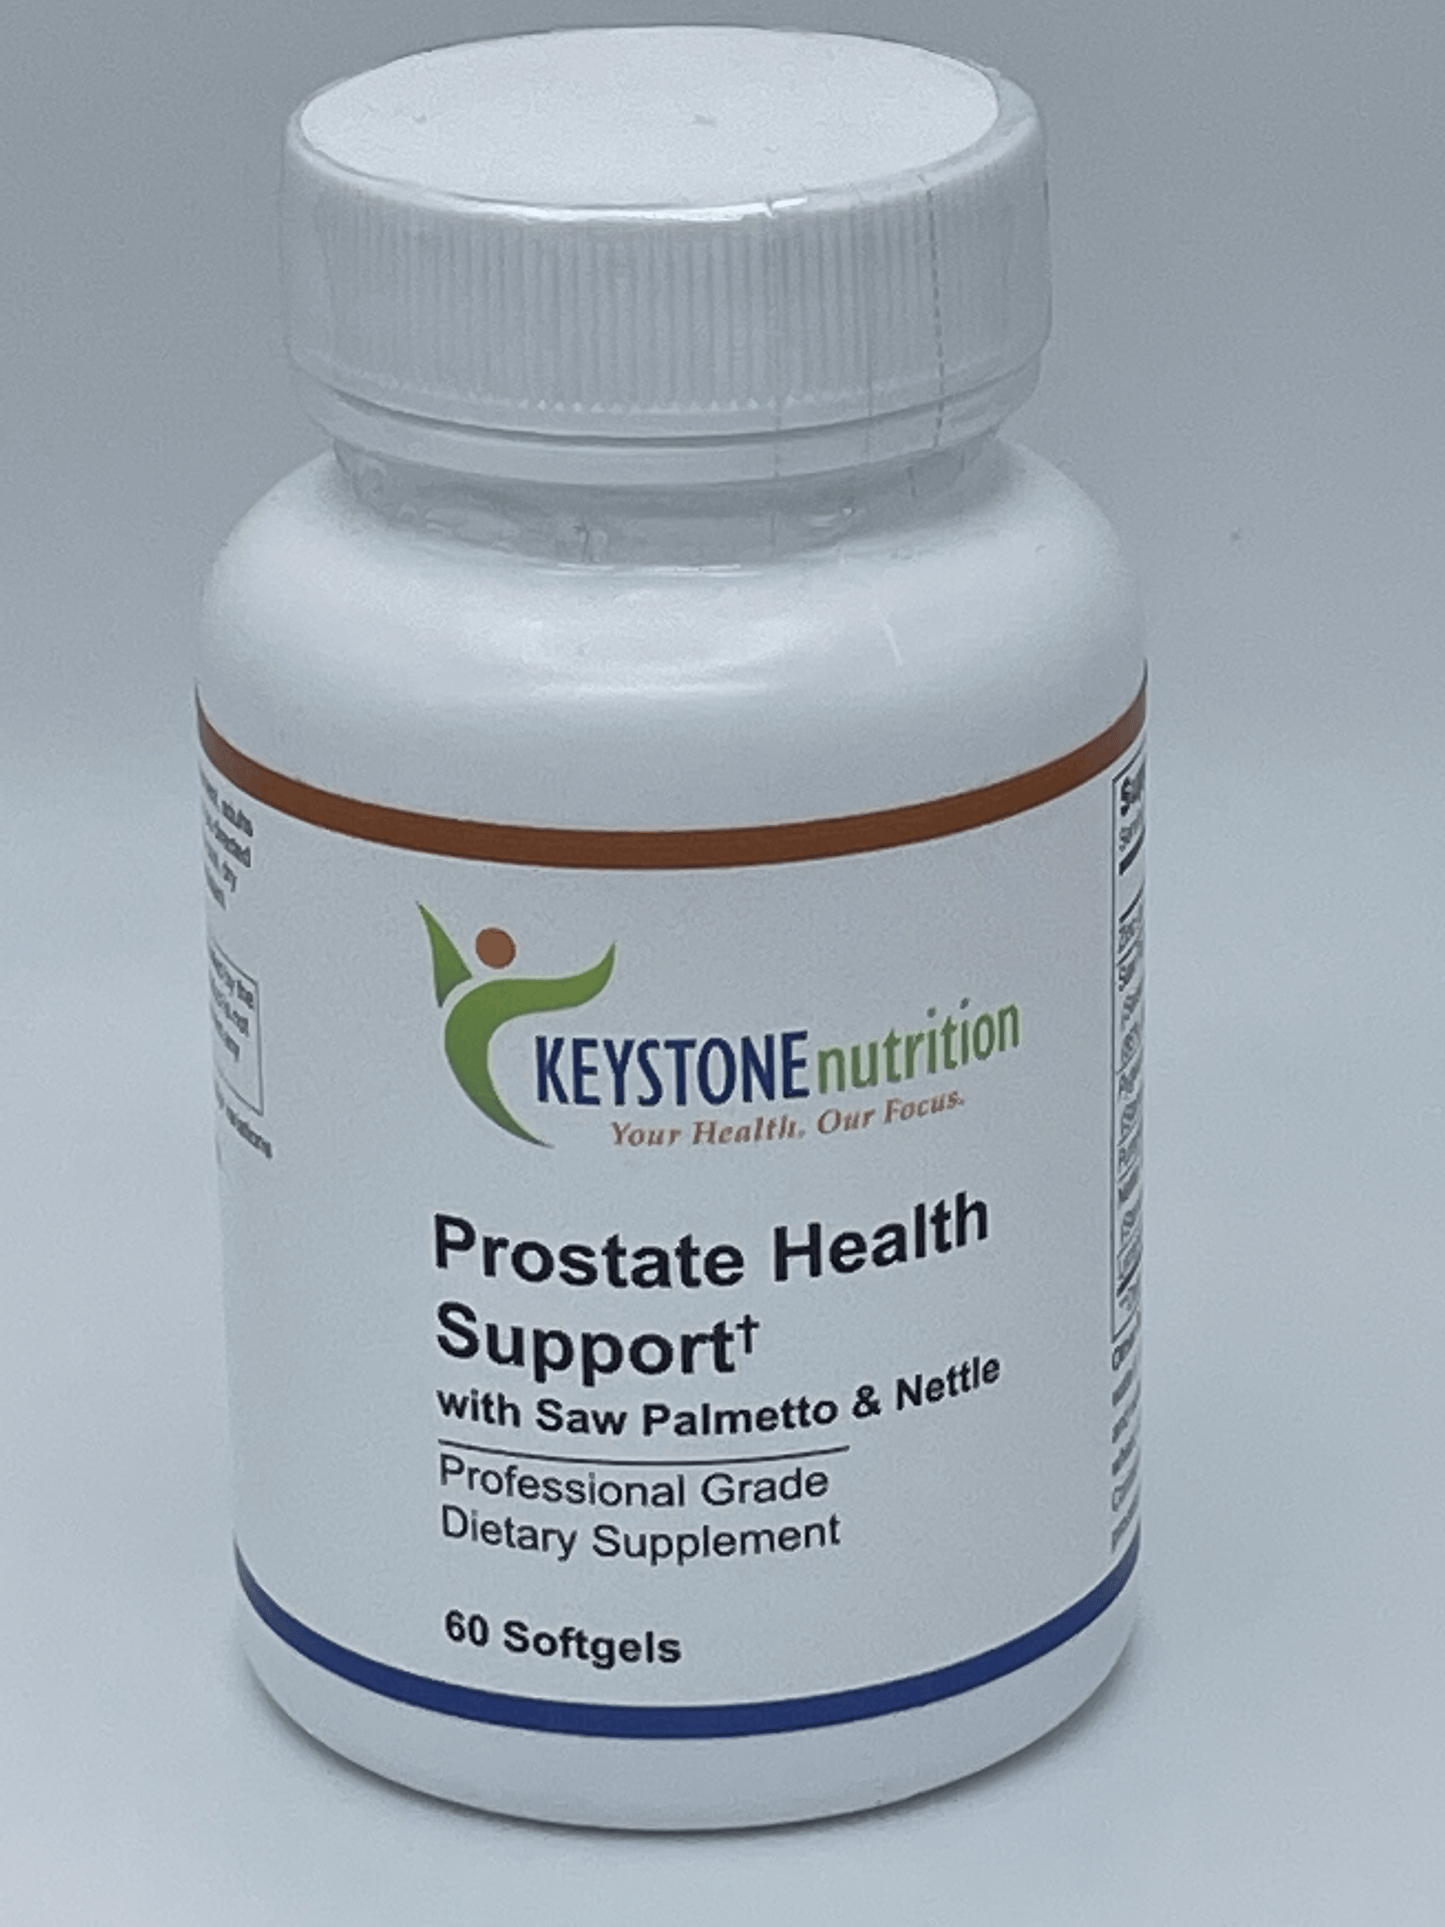 Prostate Health Support / with Saw Palmetto & Nettle